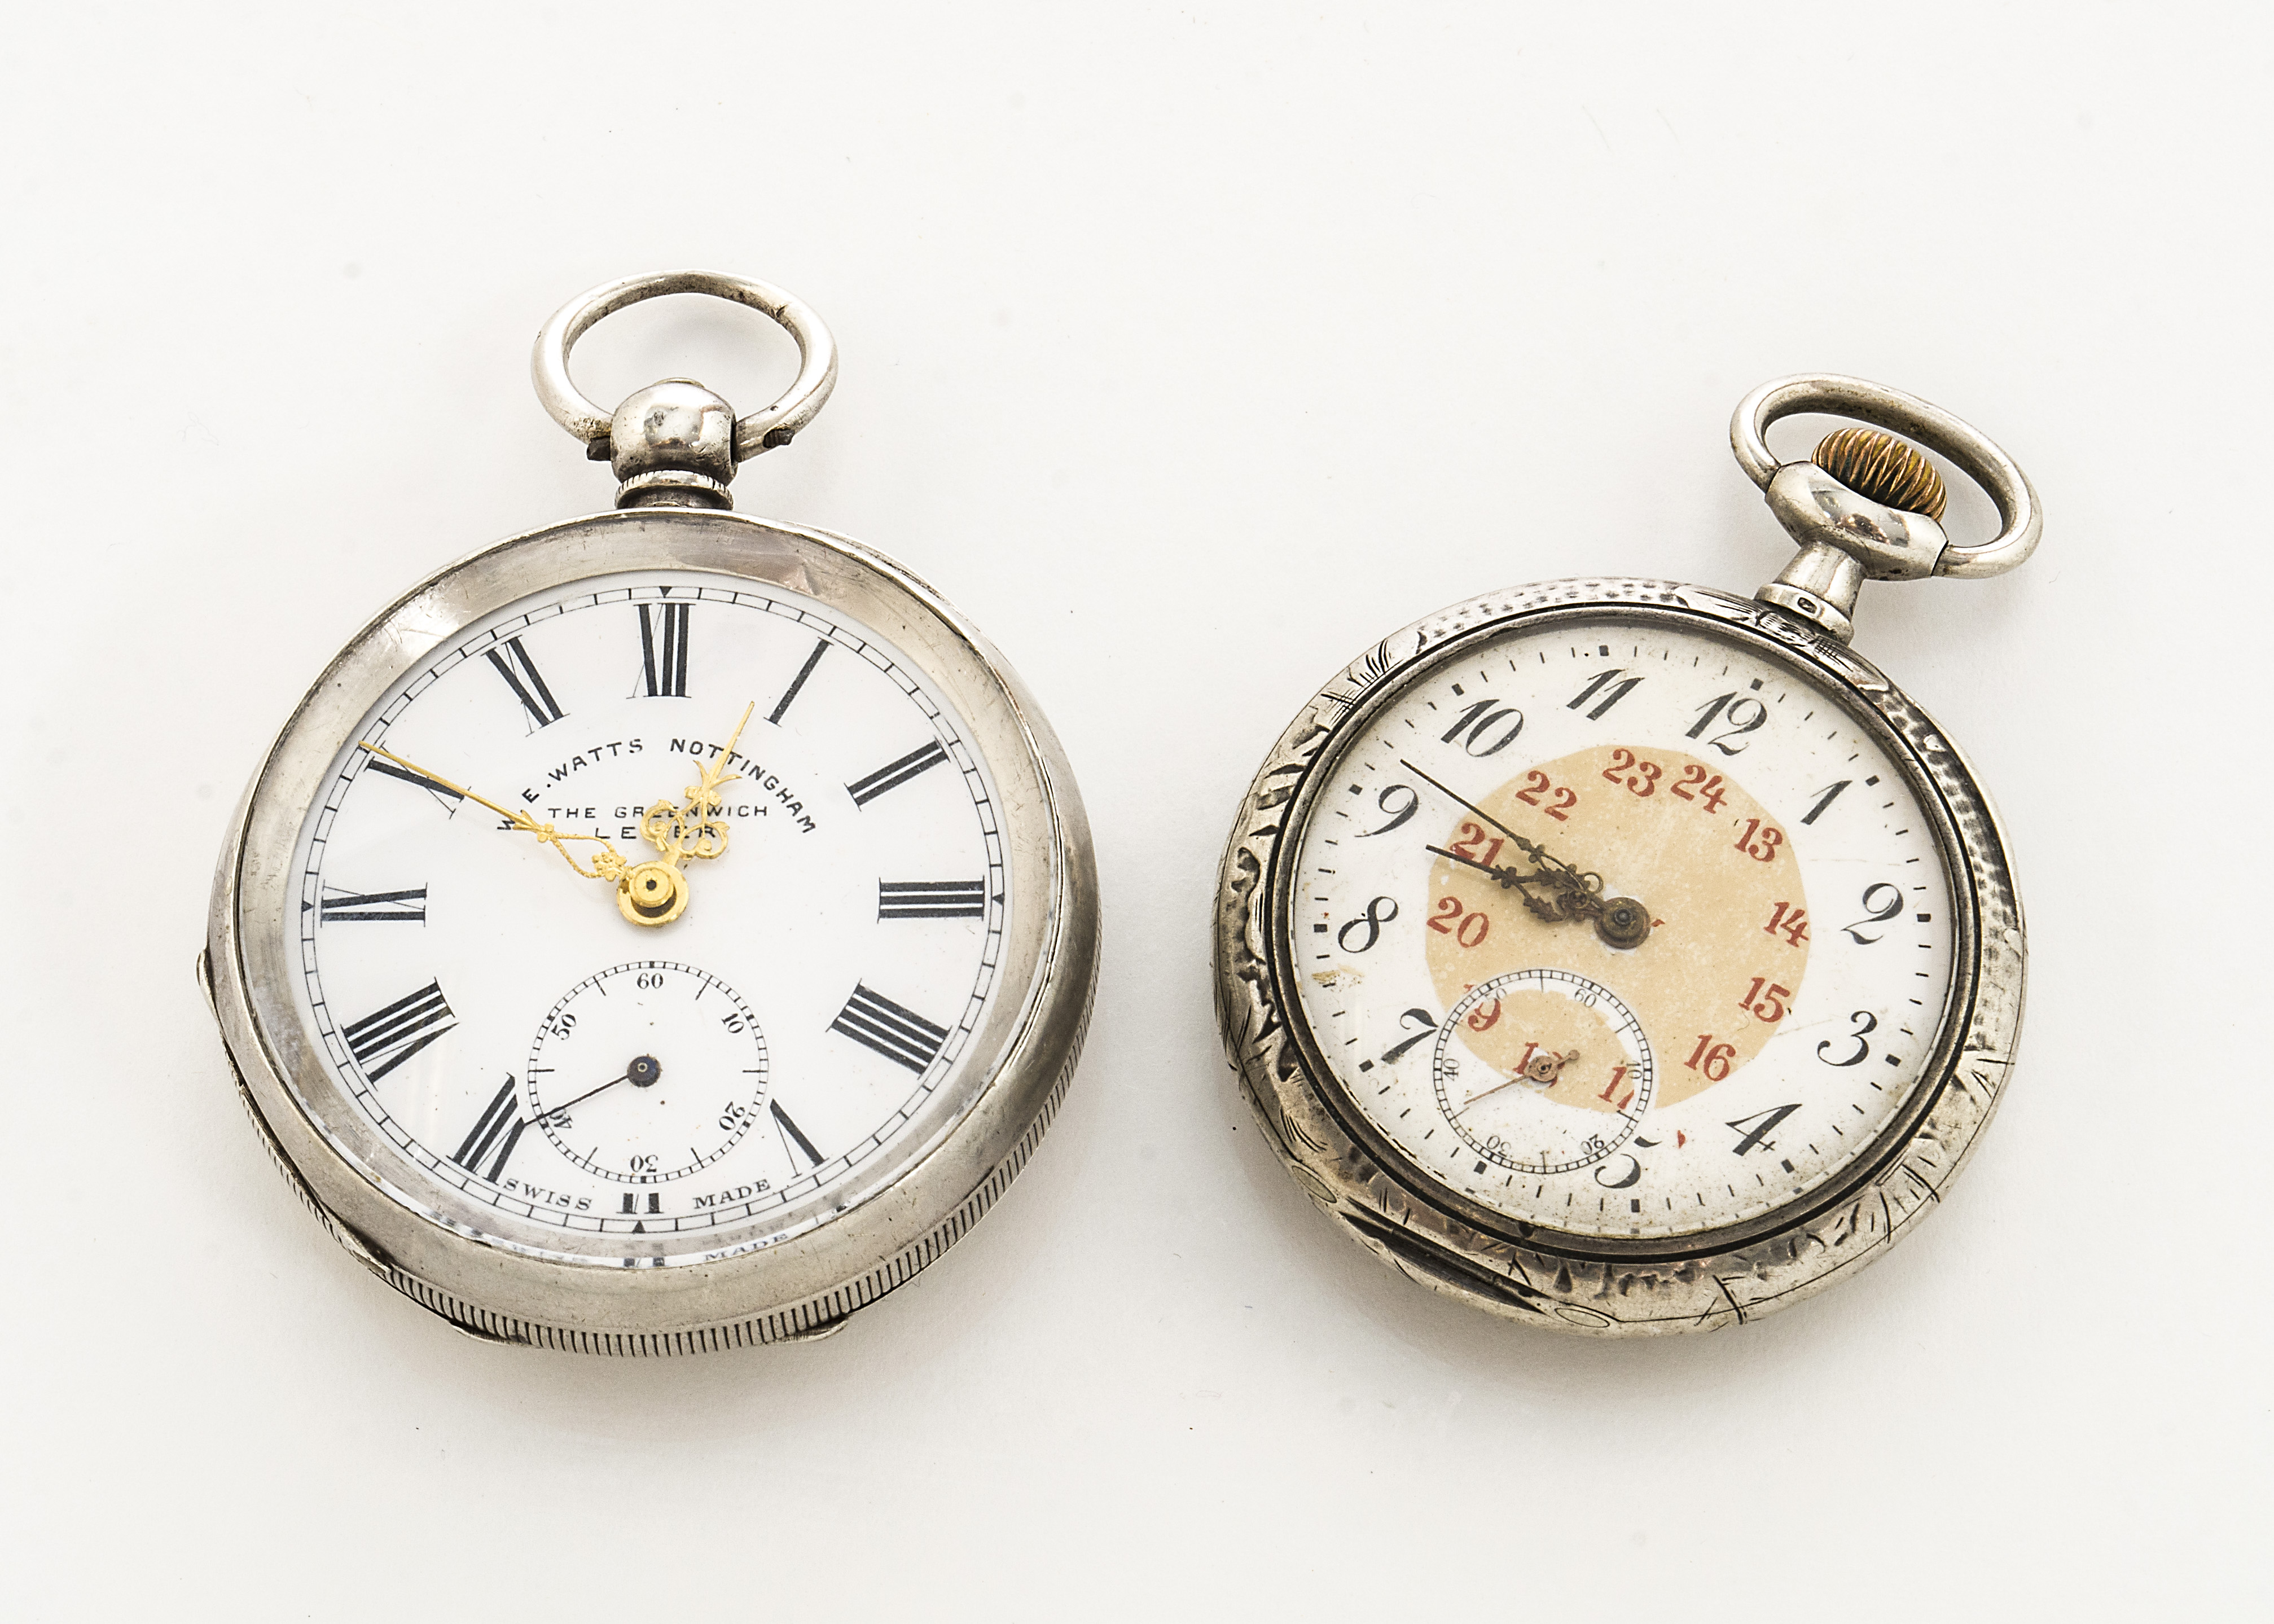 A Victorian continental silver open faced pocket watch marked W.E. Watts Nottingham The Greenwich